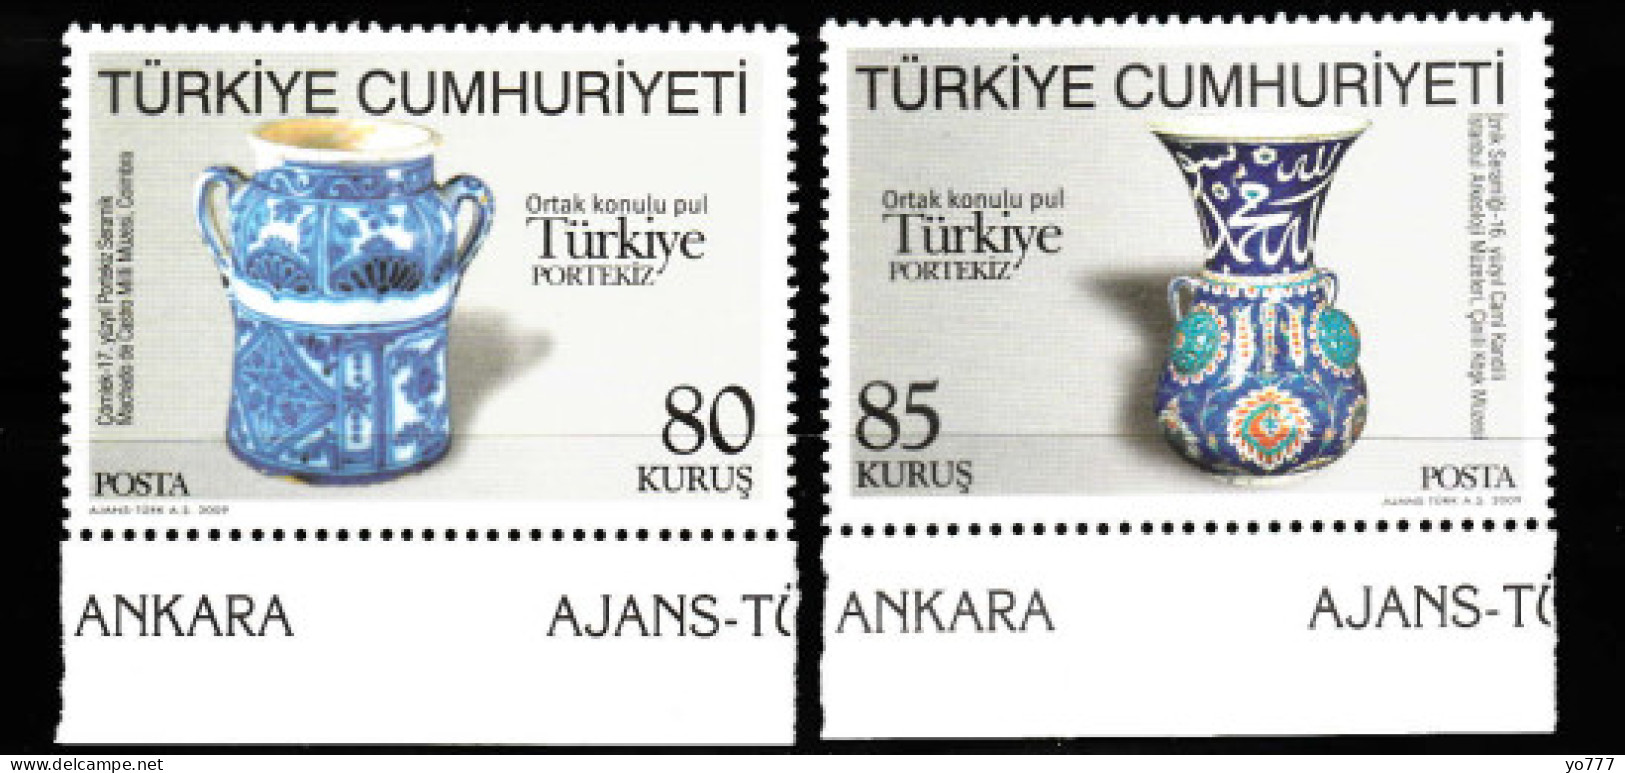 (3734-35) JOINT ISSUE OF STAMPS BETWEEN TURKEY-PORTUGAL MNH ** - Unused Stamps